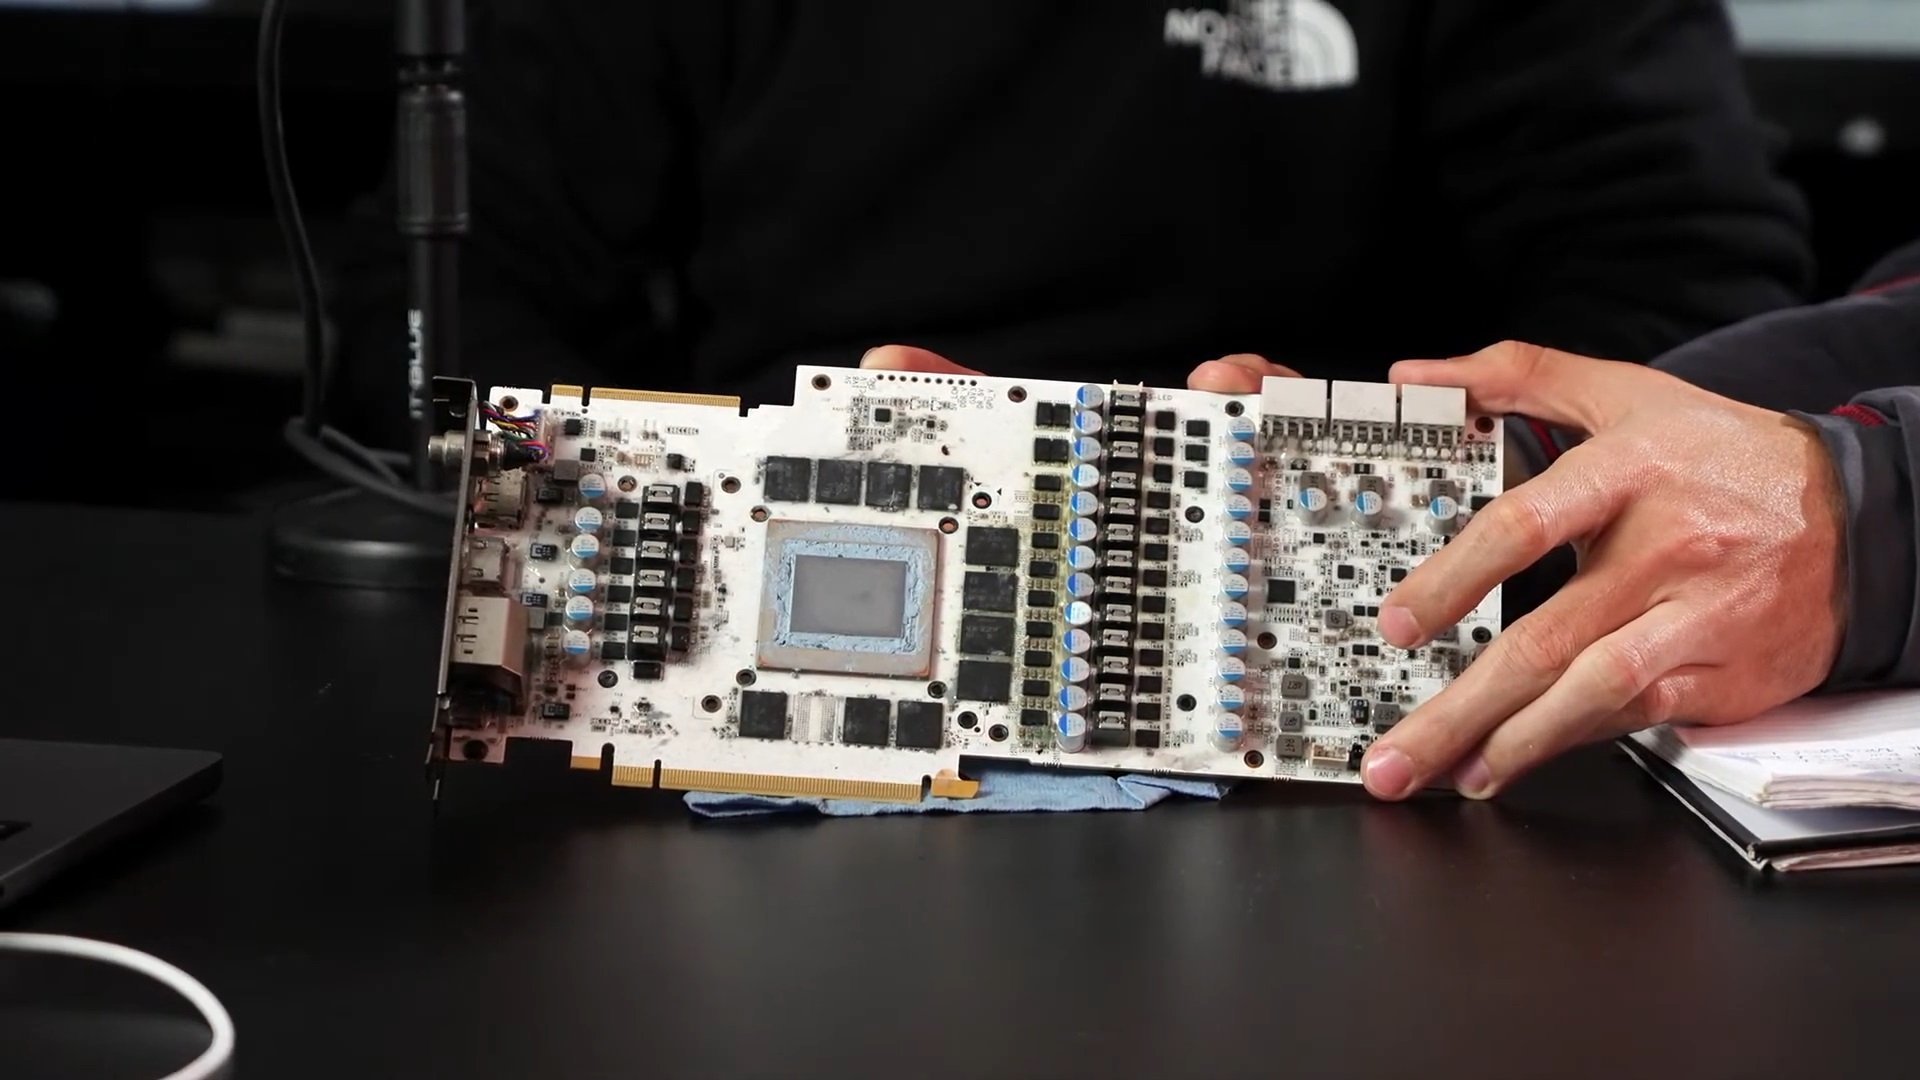 The board of the RTX 4090 Super graphics card.